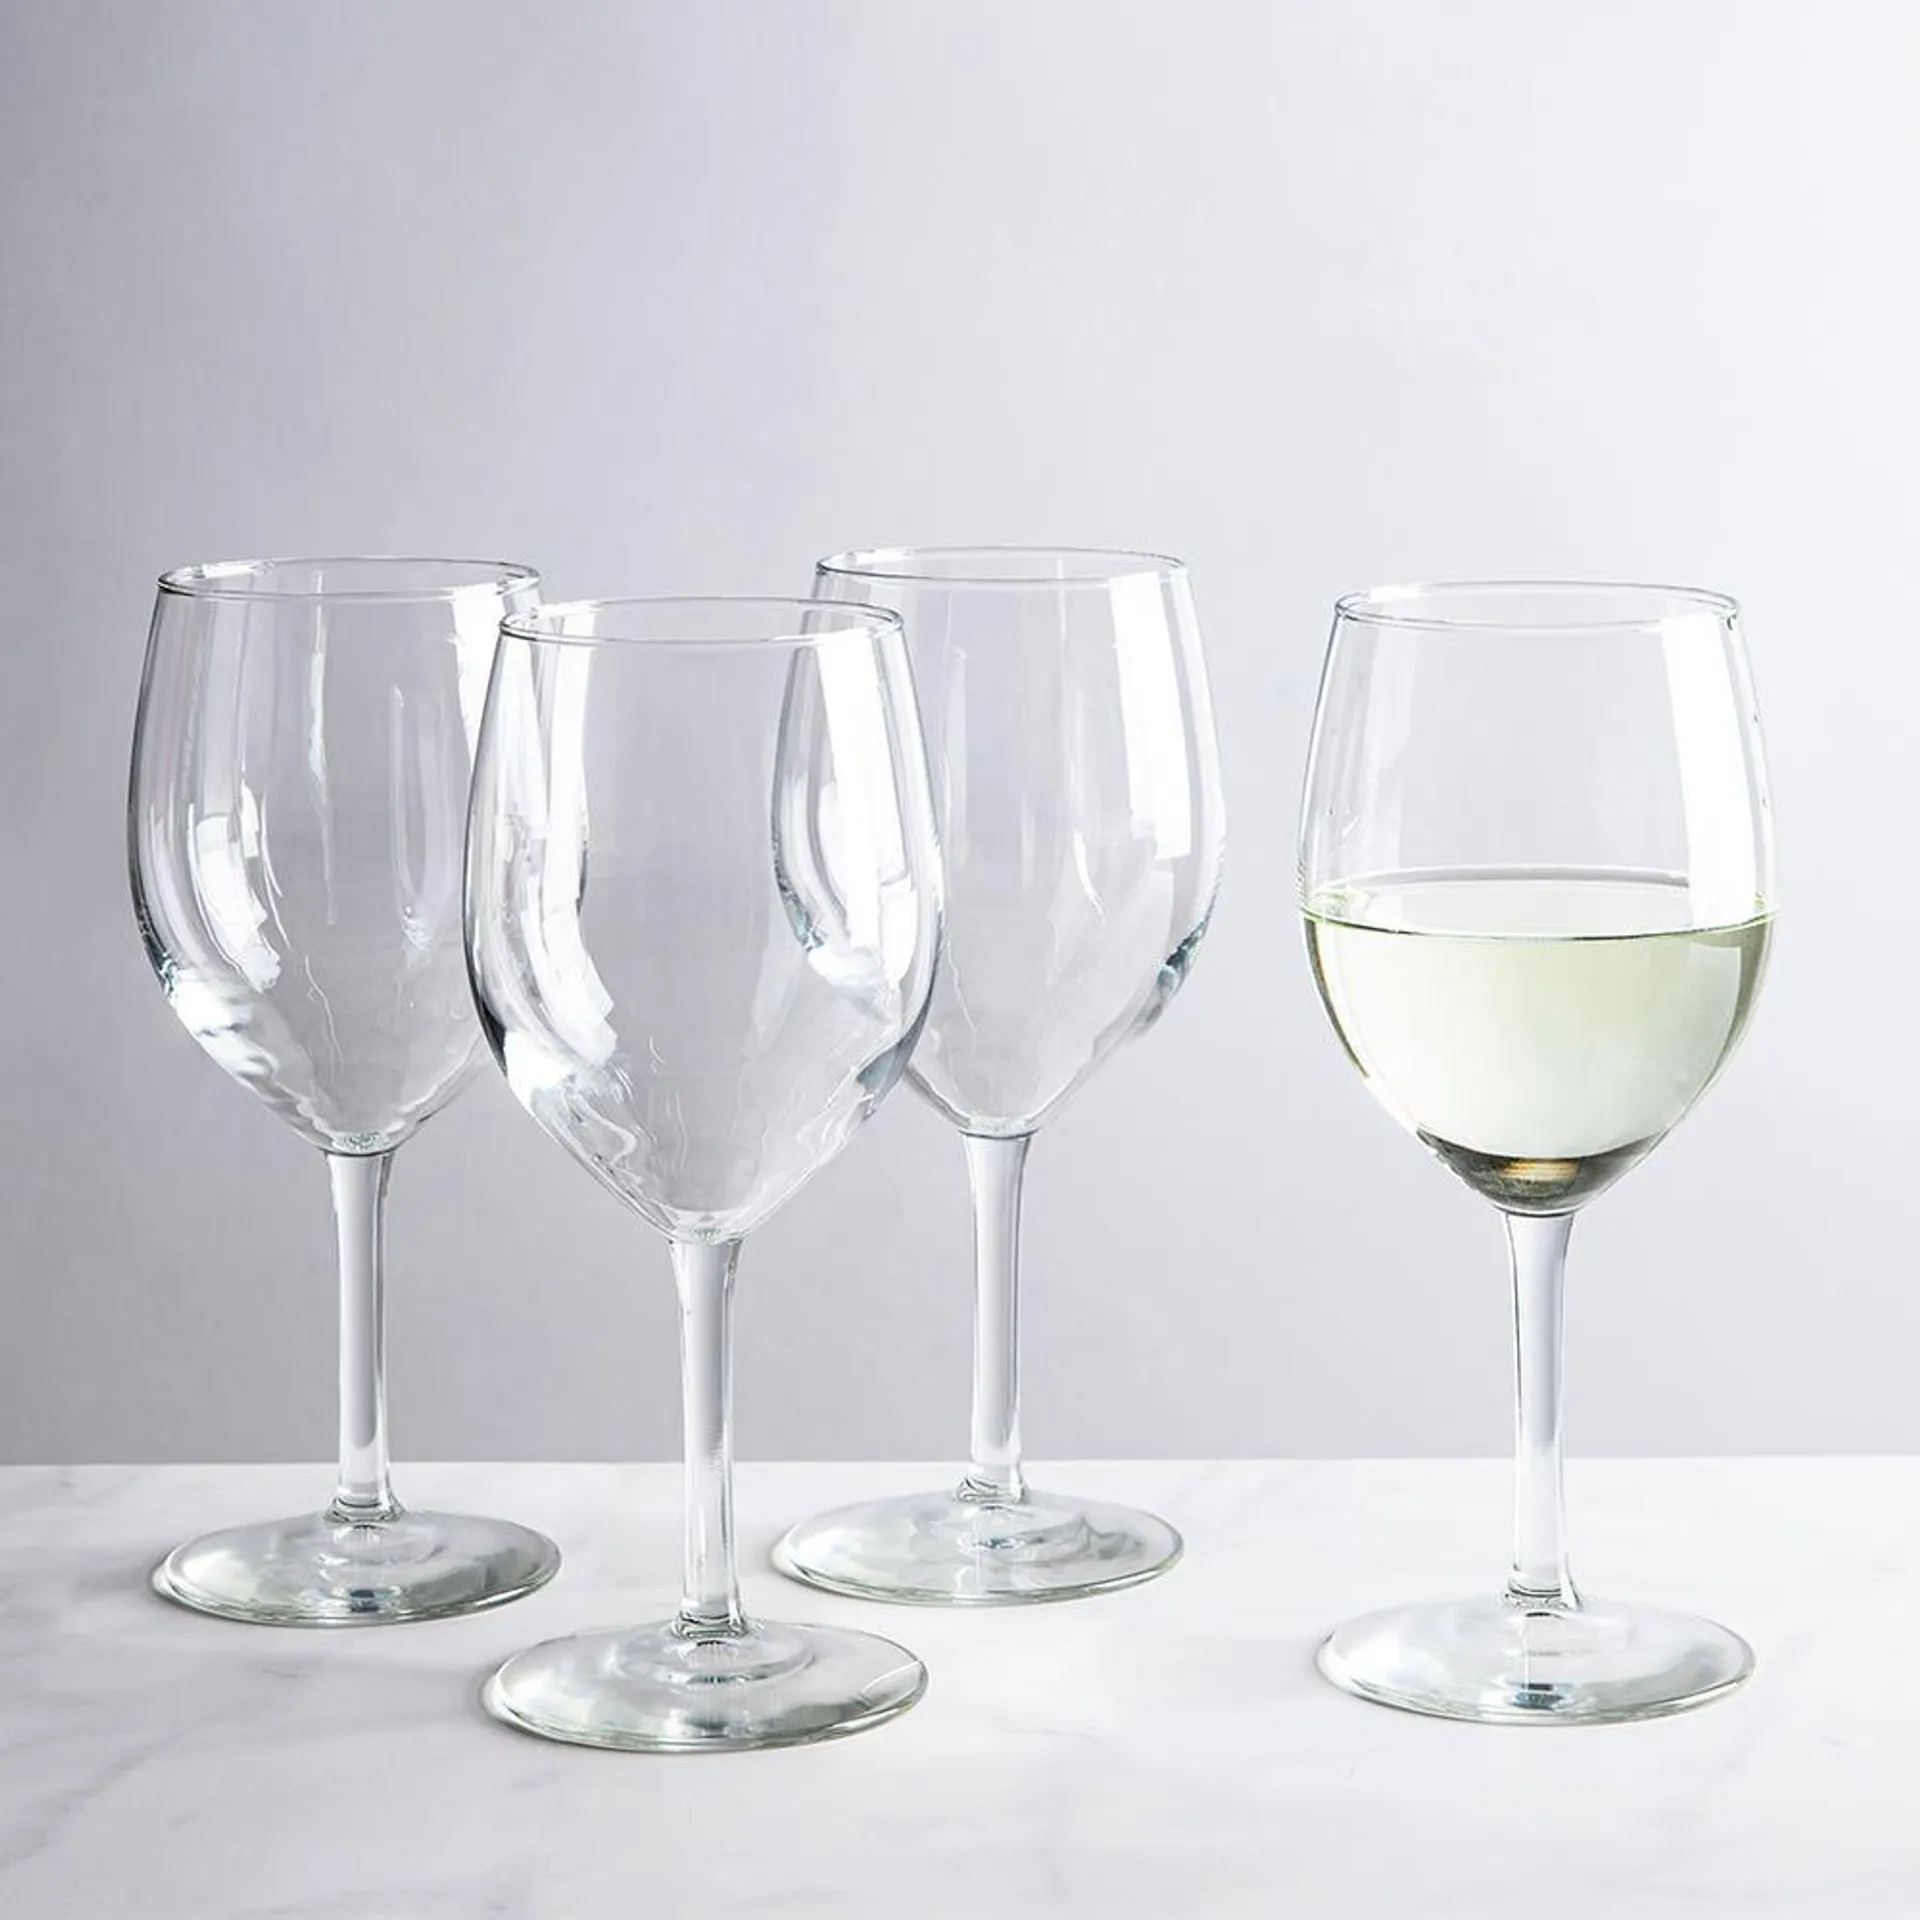 Libbey Everglass White Wine Glass - Set of 4 (Clear)